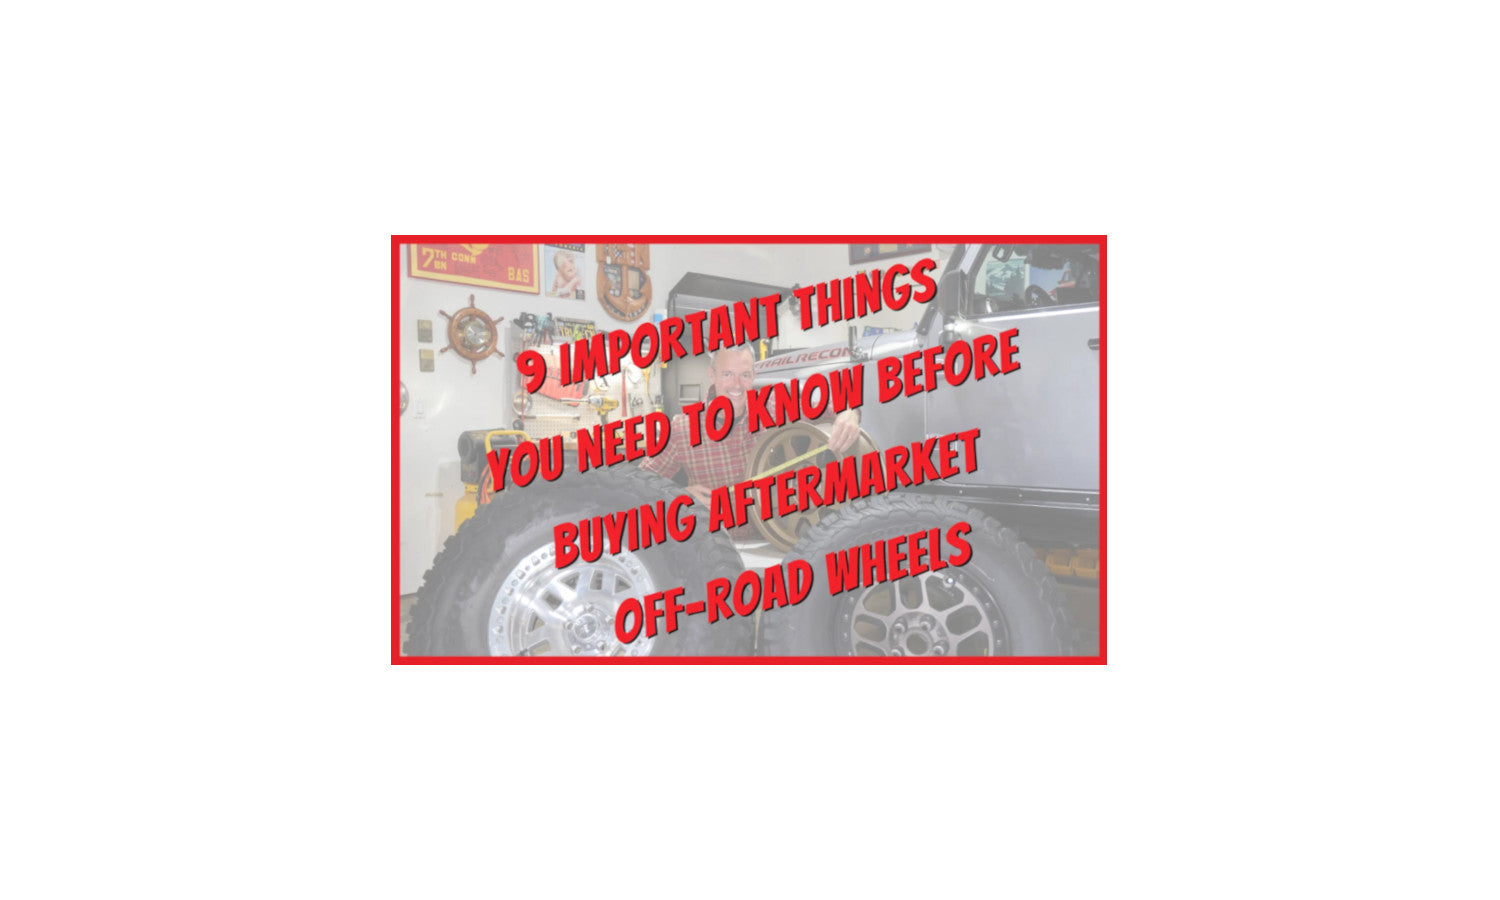 9 Important Things You Need to Know Before Buying Aftermarket Off-Road Wheels